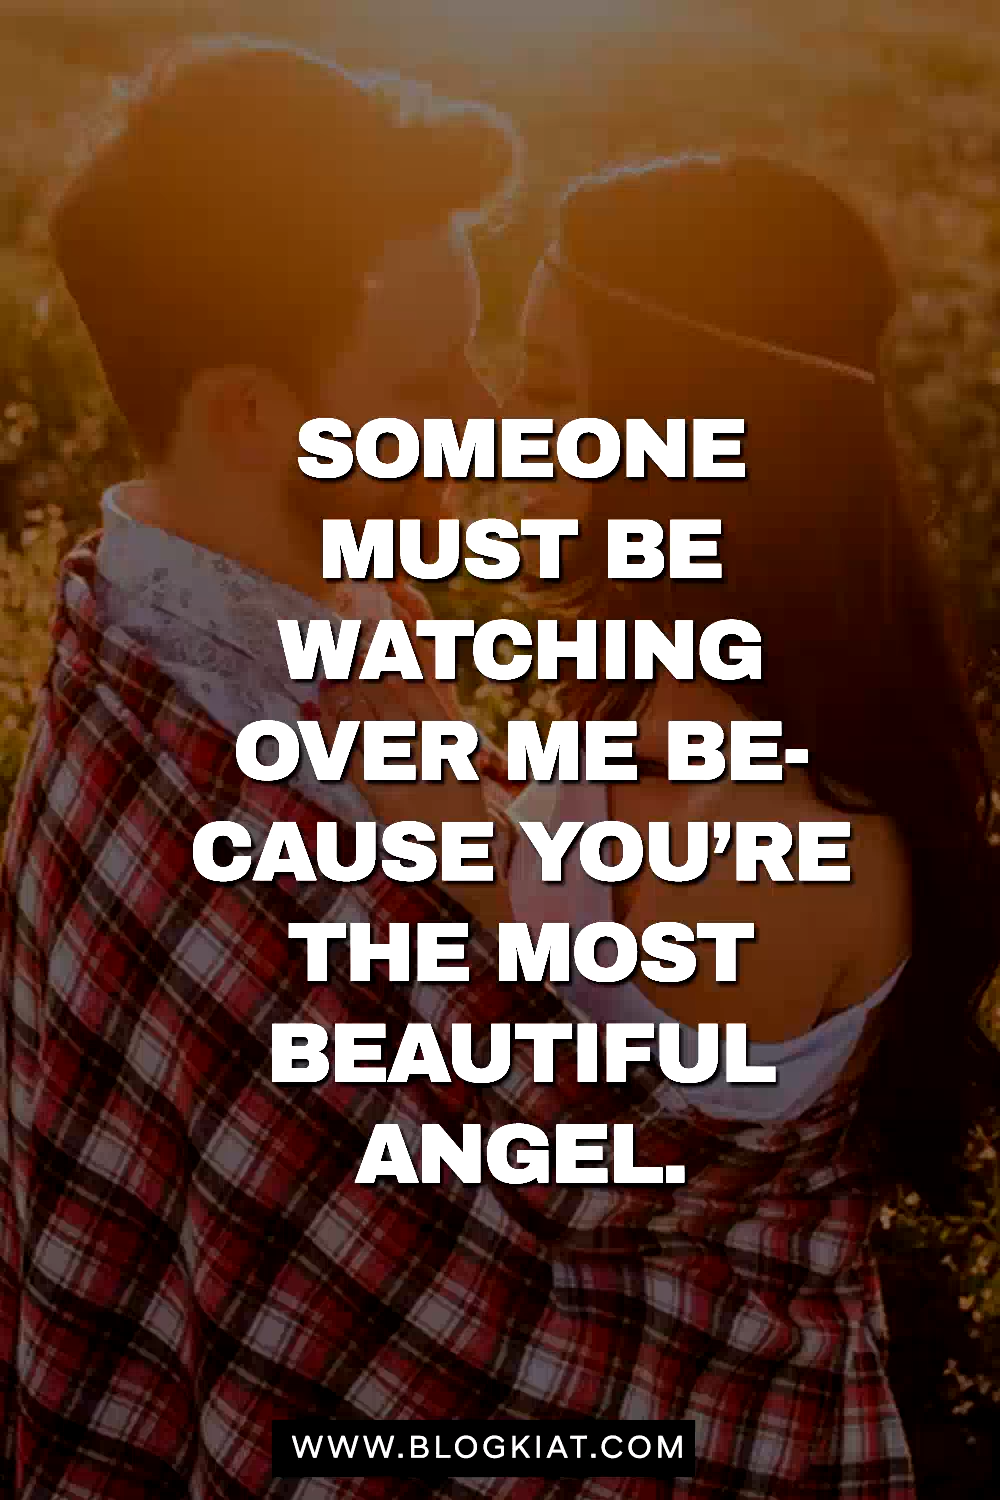 Best Love Quote Status Video For Her | Best love status video - Best Love Quote Status Video For Her | Best love status video -   18 beauty Videos quotes ideas